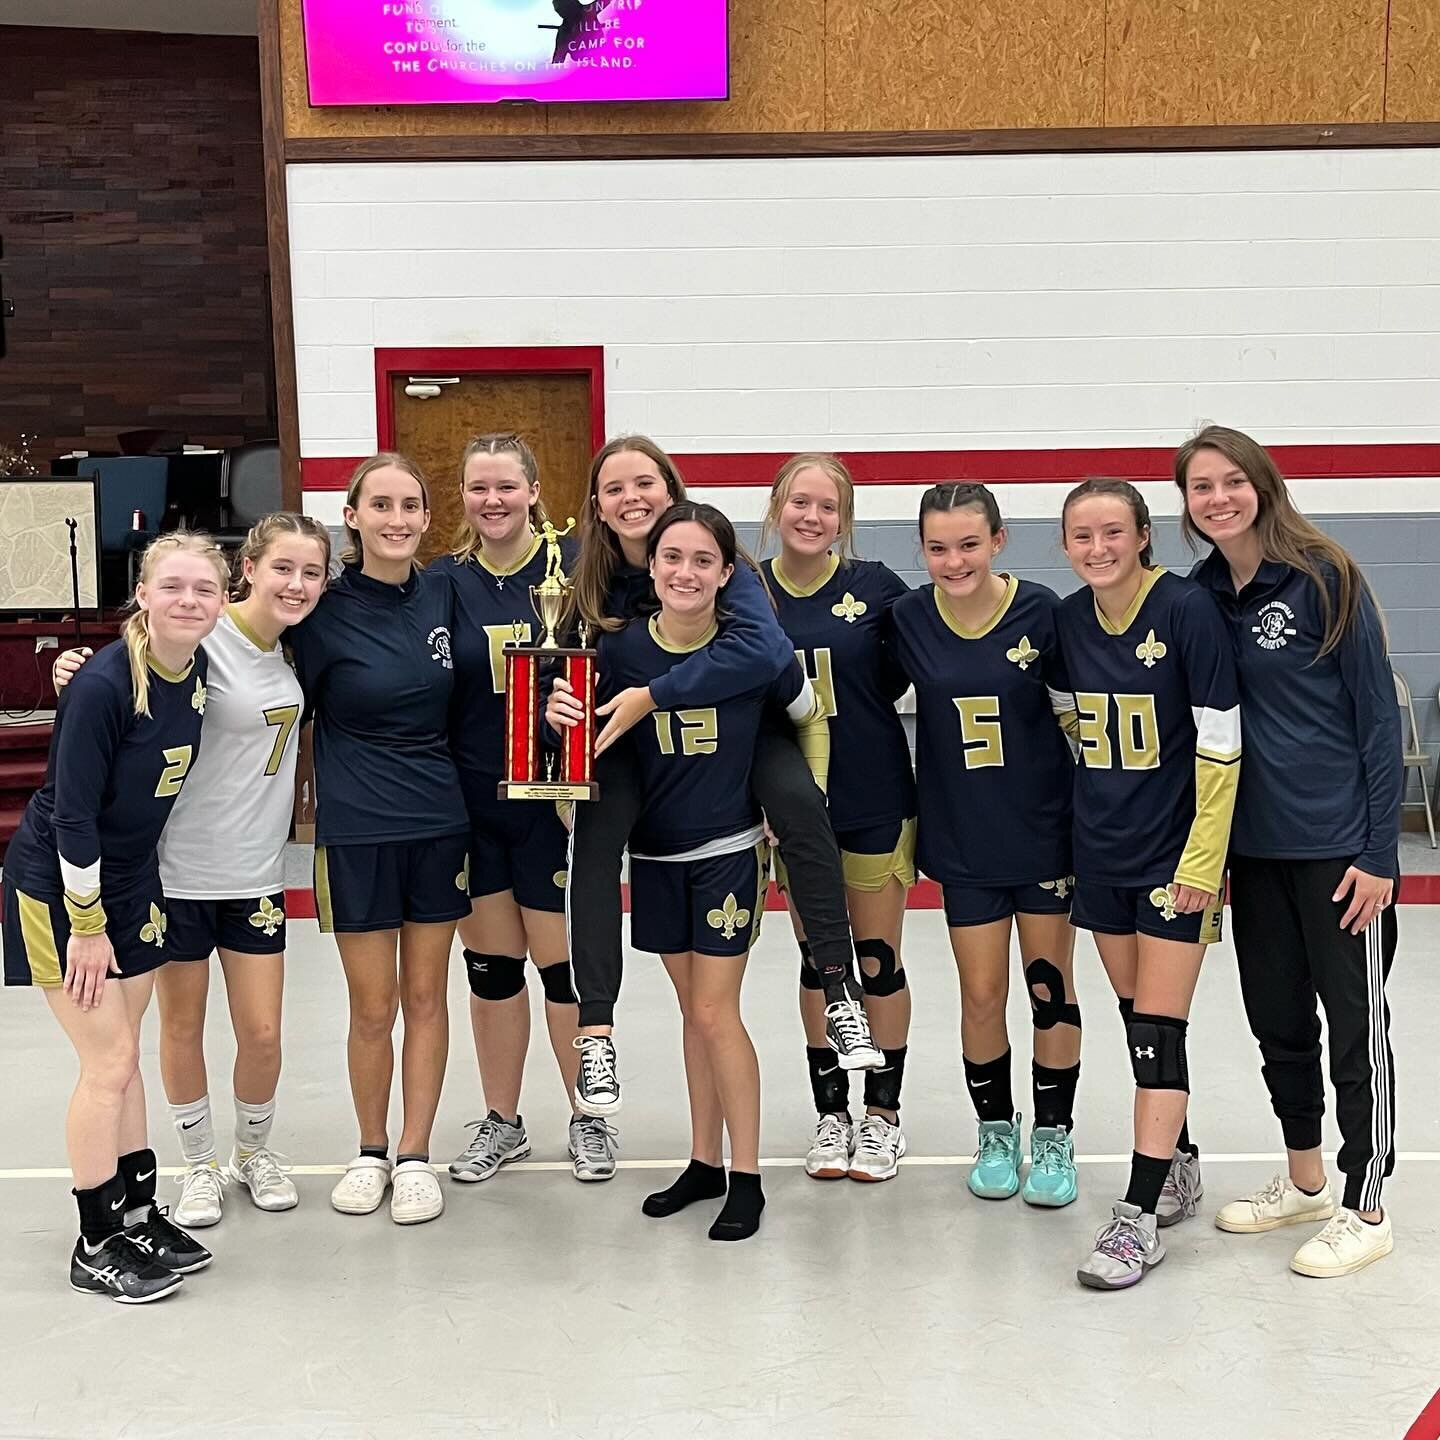 🏀🥈 Lady Saints Take 2nd Place! 🥈🏀

We're incredibly proud of our Lady Saints for their outstanding performance in the Lighthouse Tournament Championship Bracket! 

They gave it their all in the championship game, coming so close to securing the 1